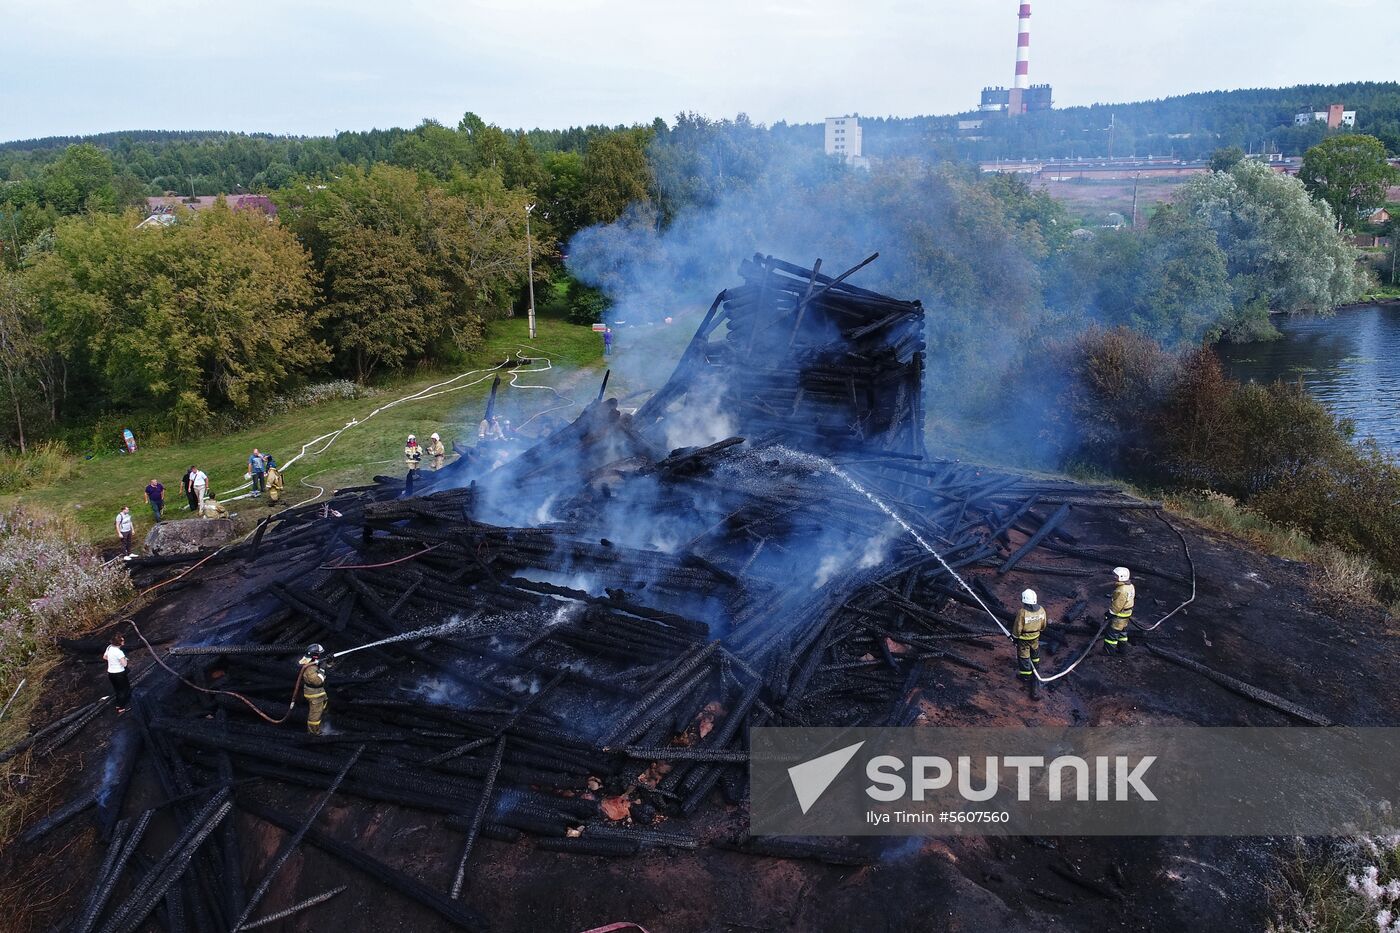 Church of the Assumption of Our Lady in Karelia burns down